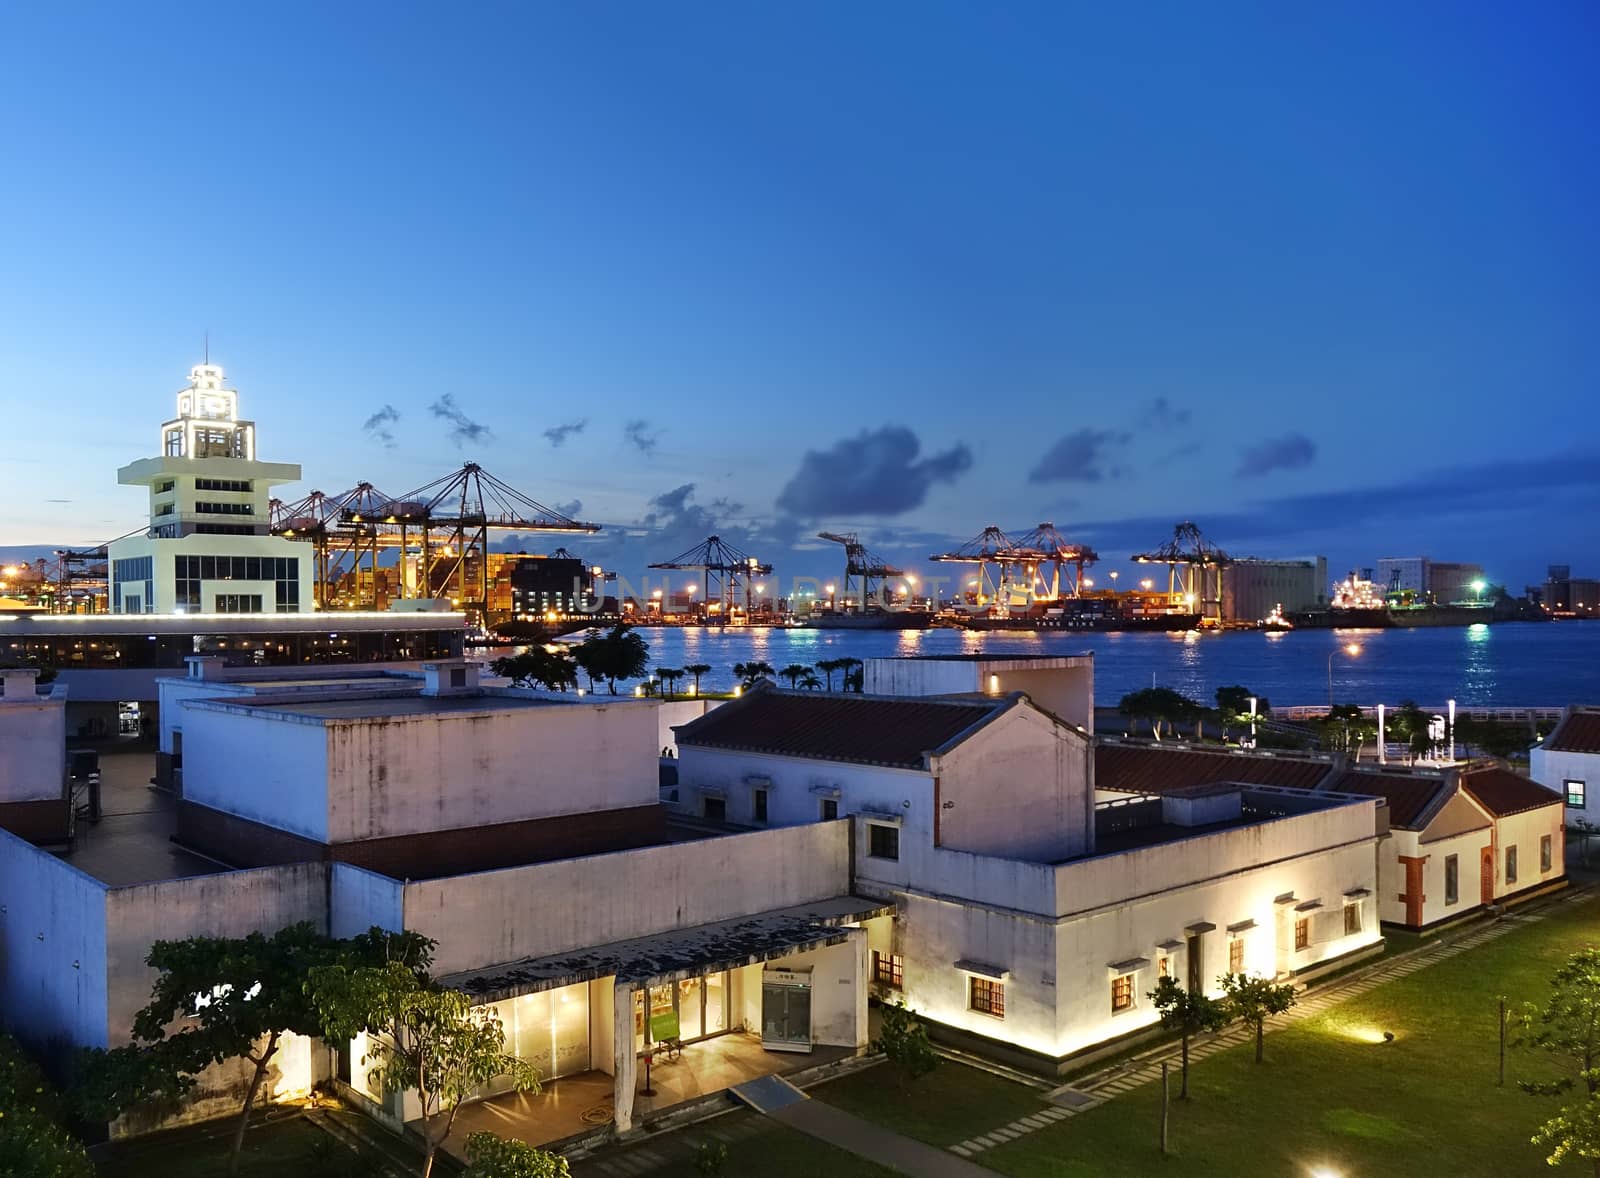 KAOHSIUNG, TAIWAN -- JUNE 2, 2019: Evening view of the Hongmaogang Cultural Park with the container port in the background.
